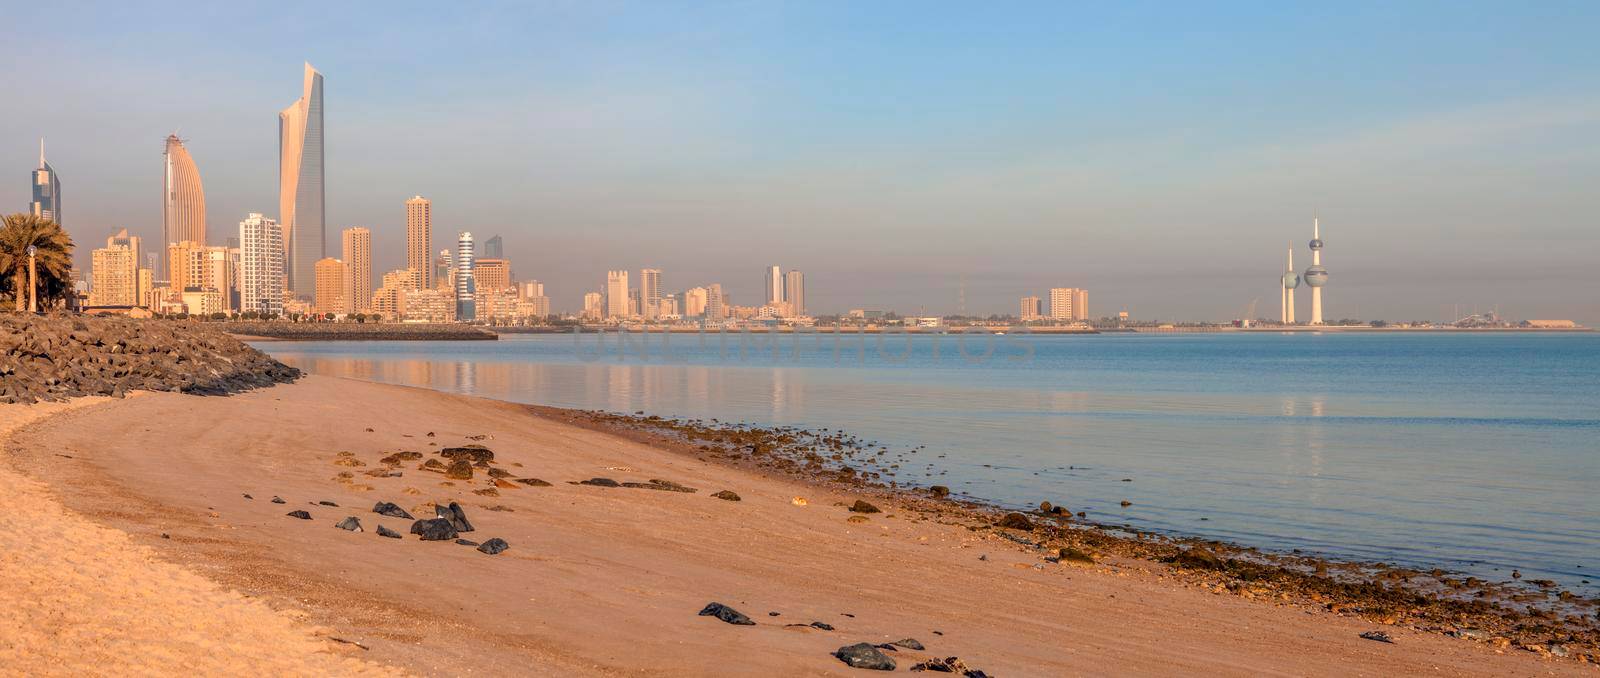 Panorama of Kuwait City from the beach by benkrut